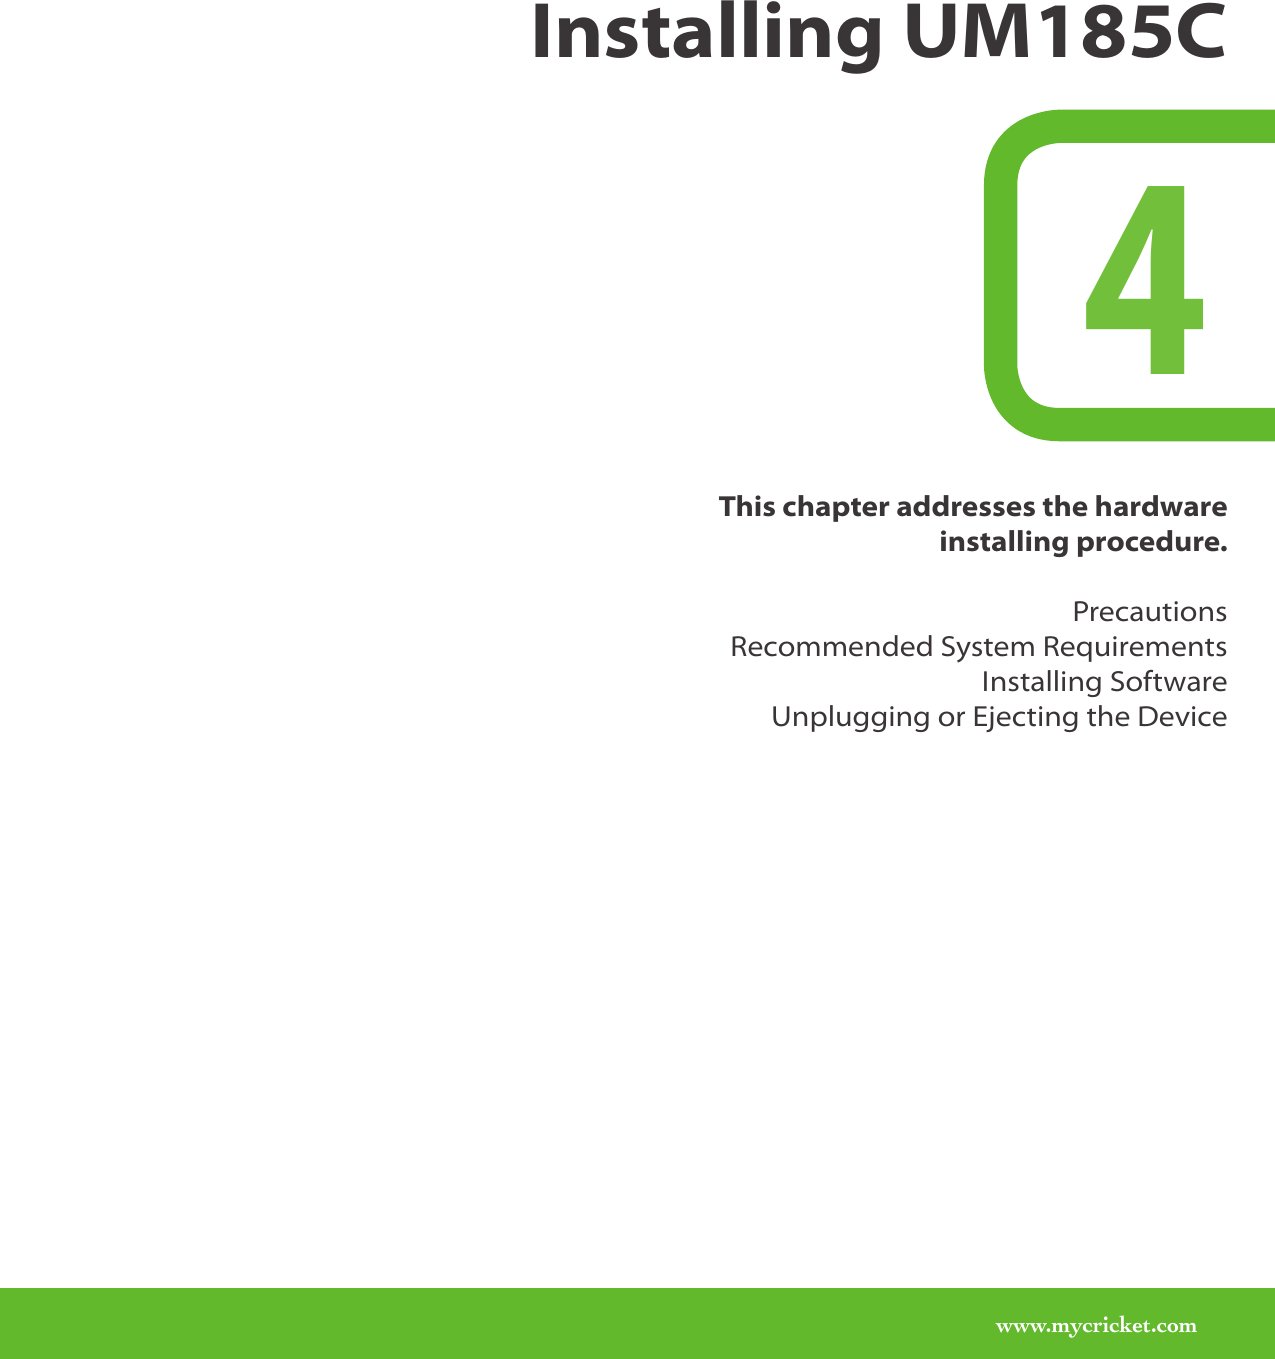 www.mycricket.comInstalling UM185C4This chapter addresses the hardware  installing procedure.PrecautionsRecommended System RequirementsInstalling SoftwareUnplugging or Ejecting the Device